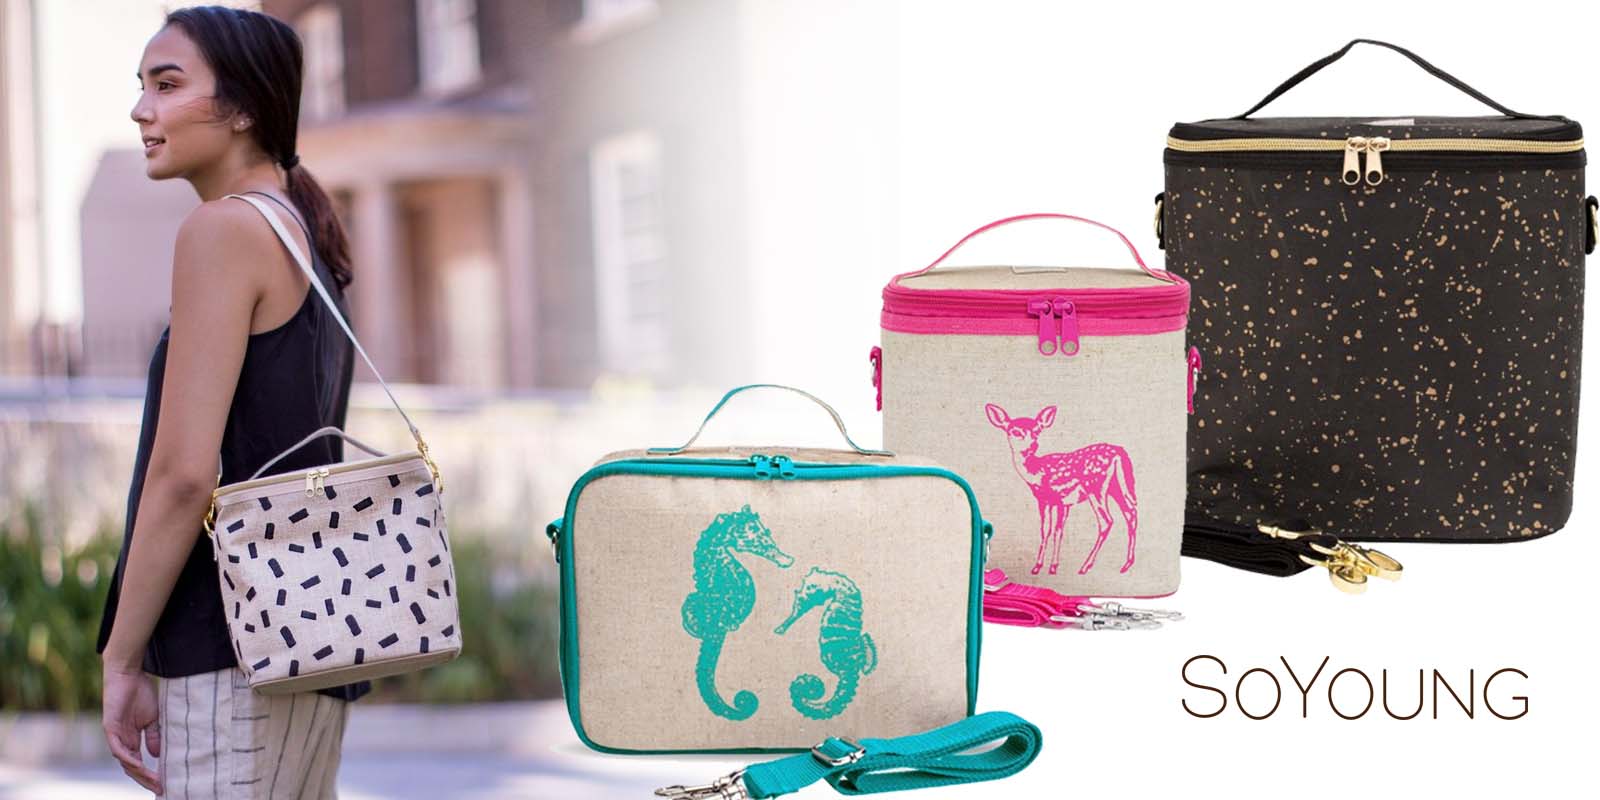 Soyoung Bag : Modern Lunch Boxes, Cooler Bags, and Diaper Bag